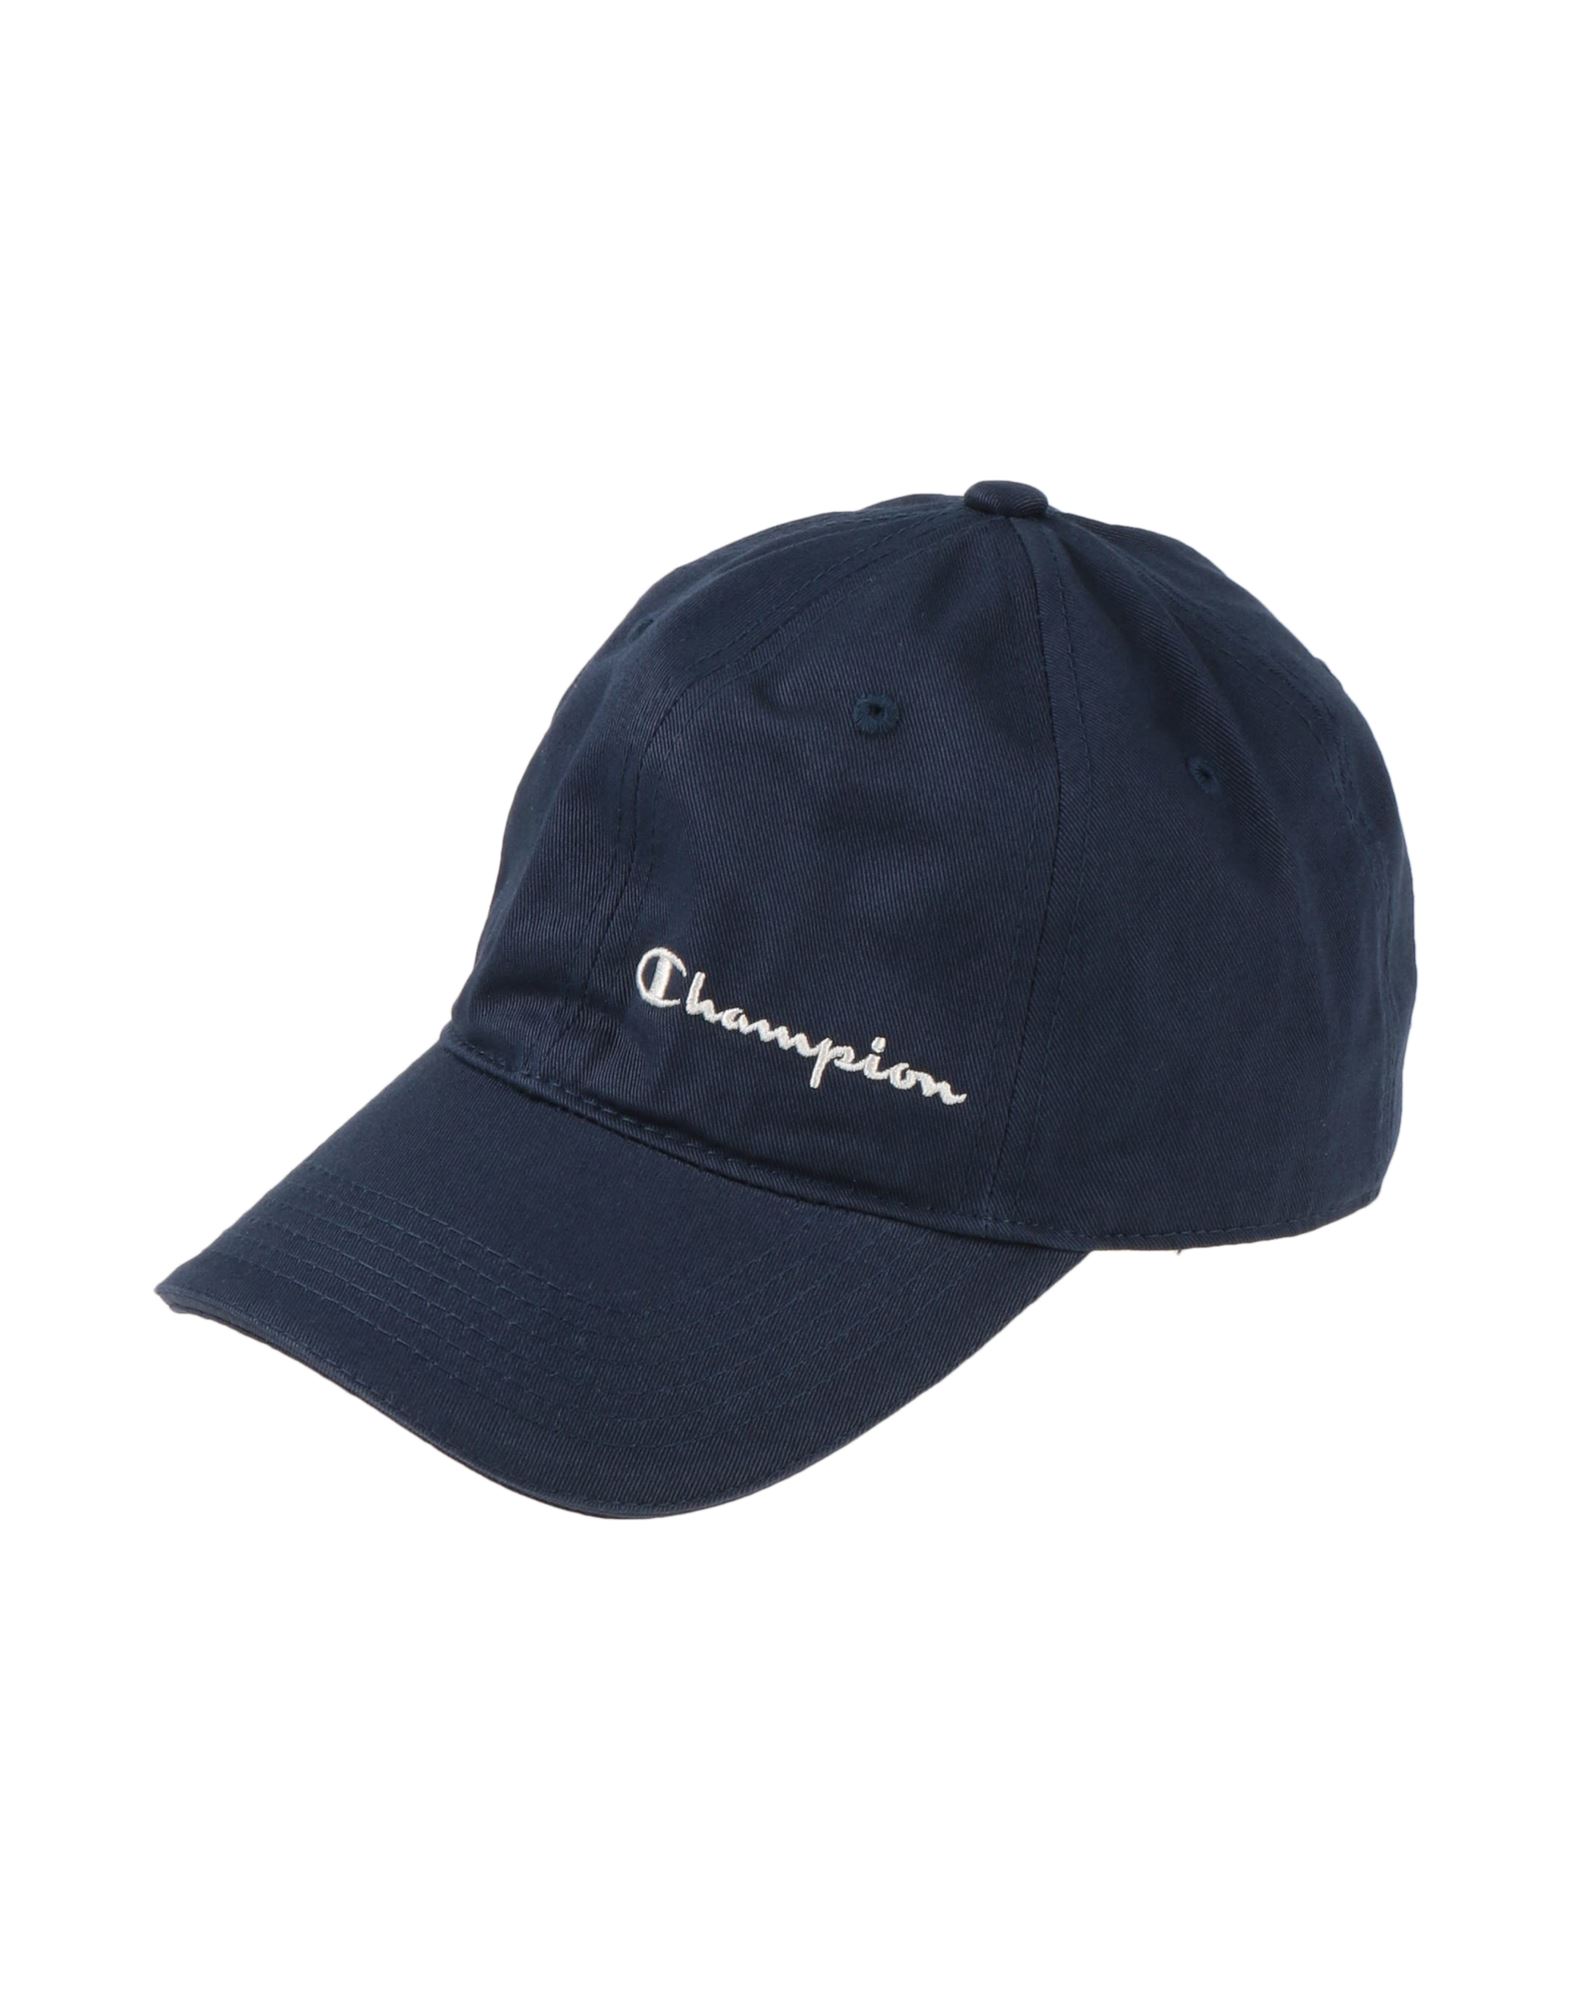 Champion Hats In Navy Blue